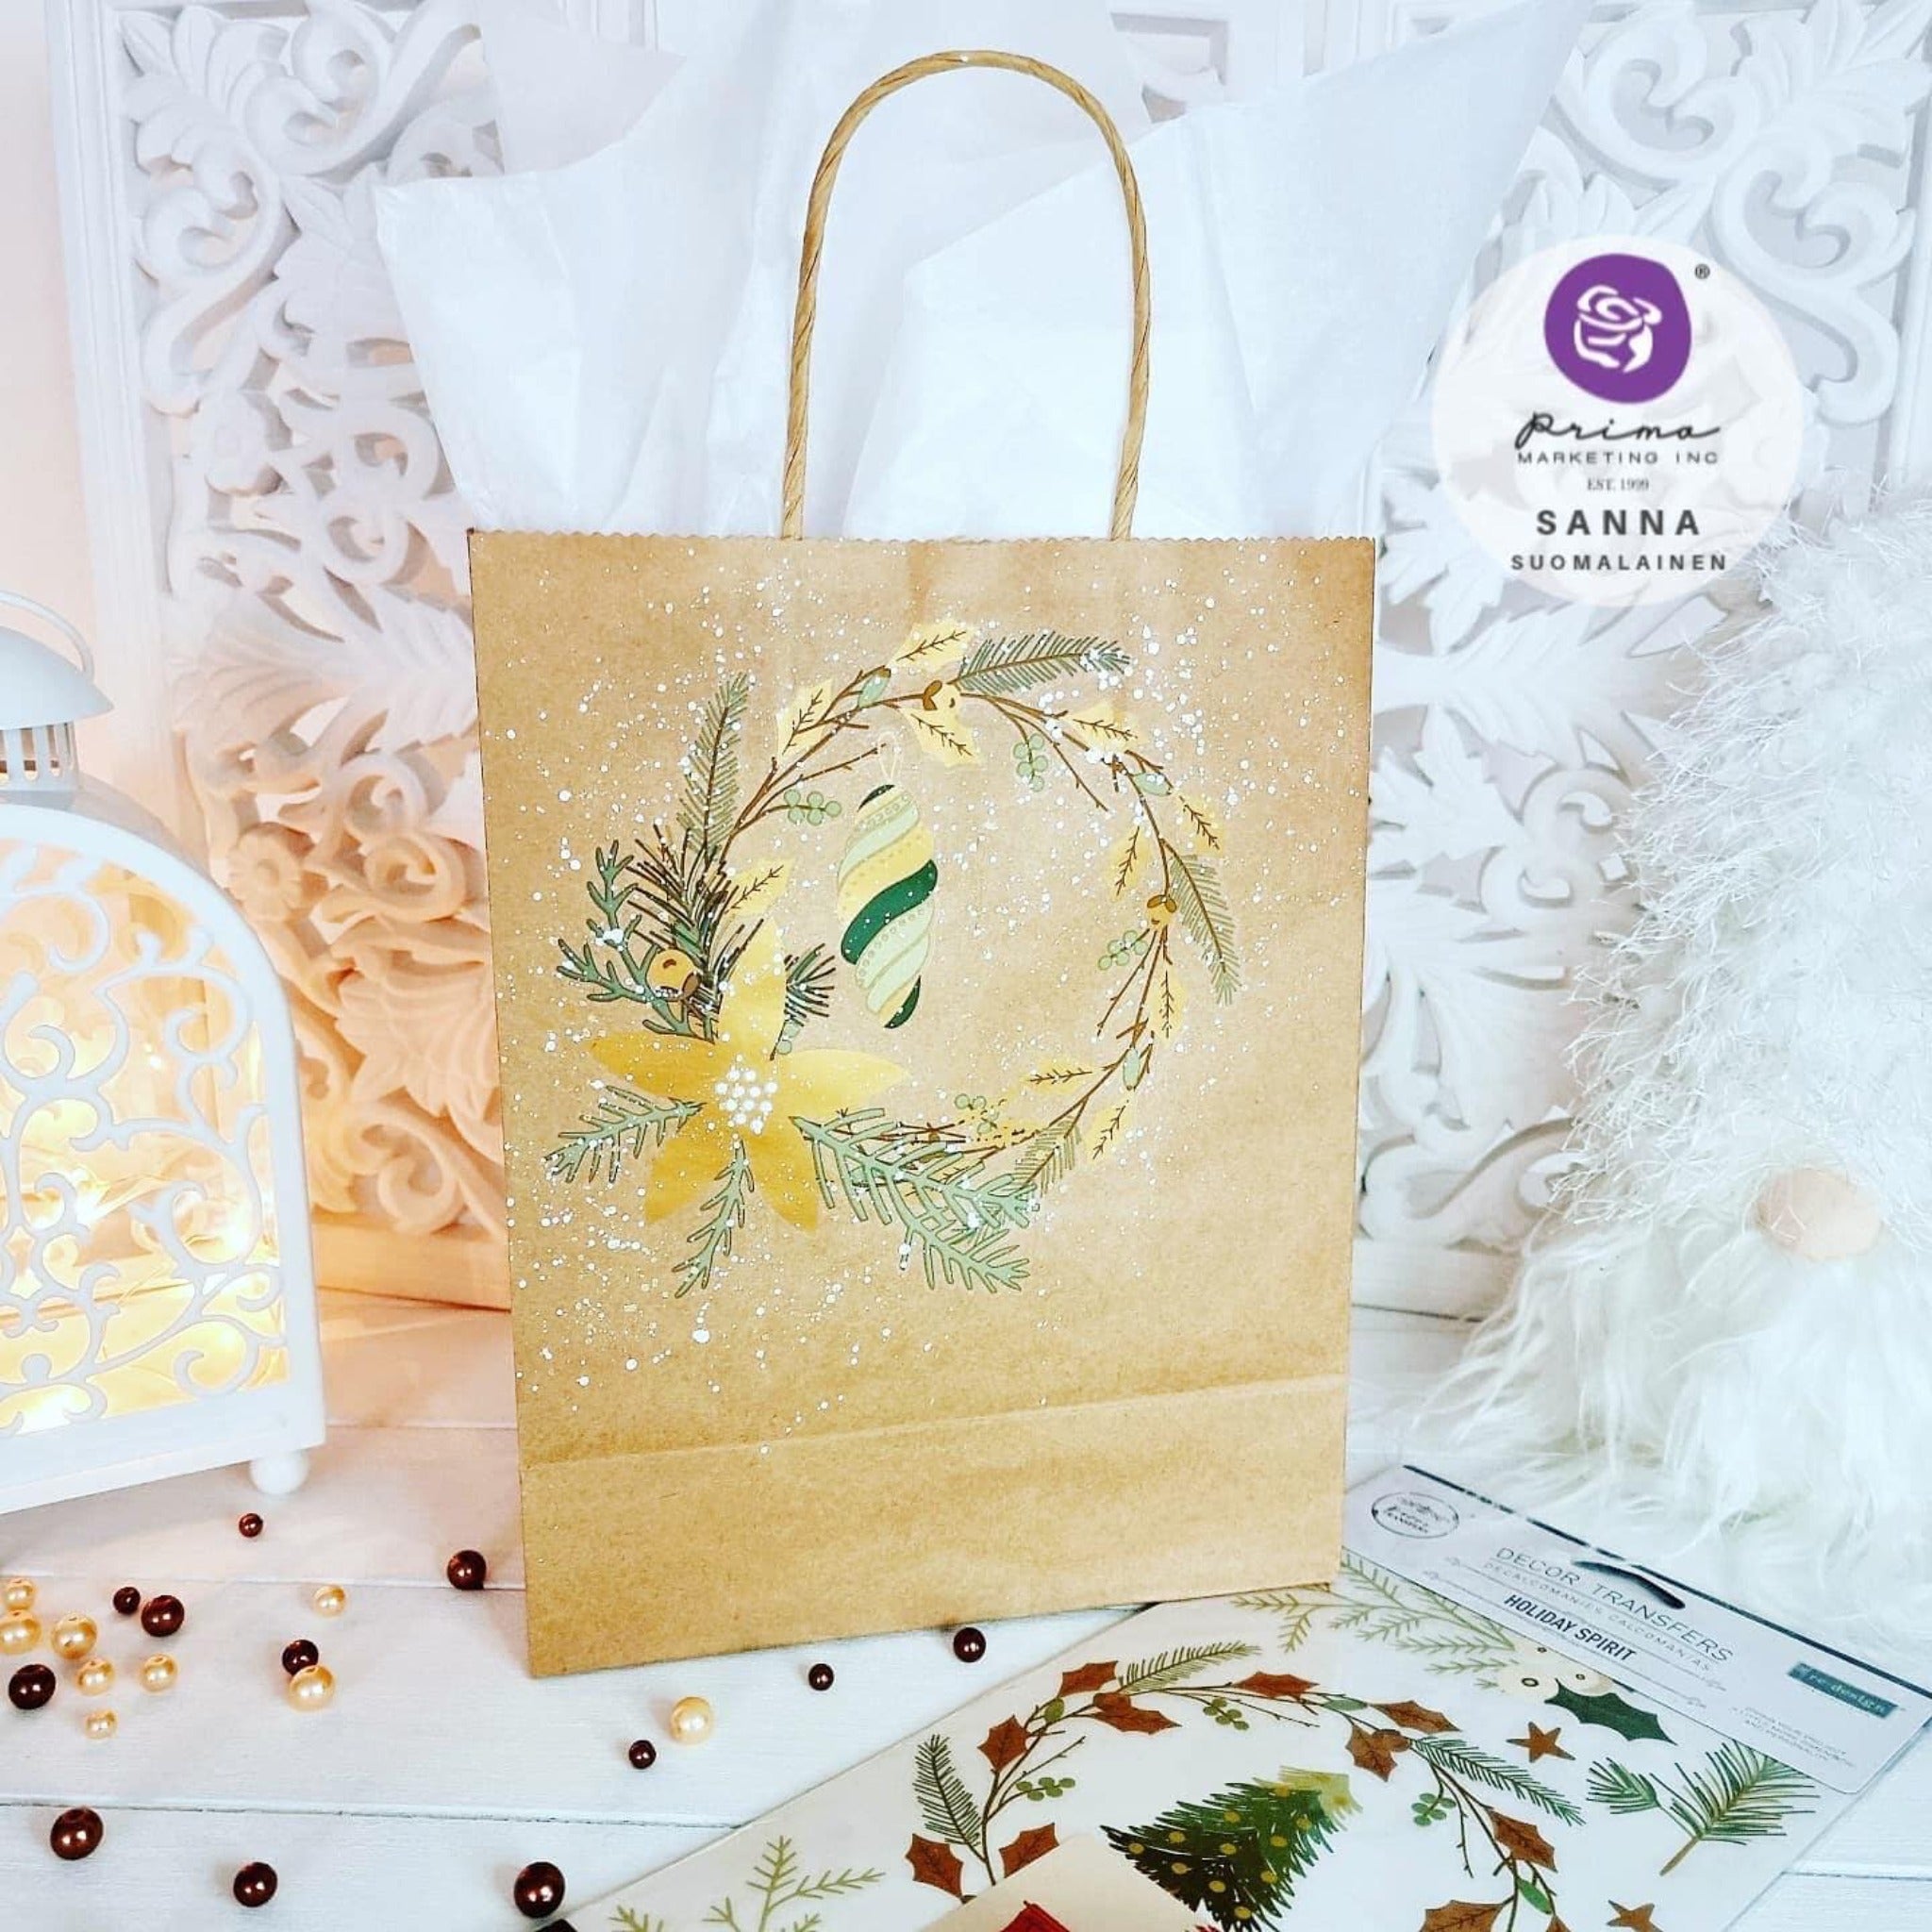 A brown gift bag decorated by Sanna Suomalainen features ReDesign with Prima's Holiday Spirit small transfer on it.